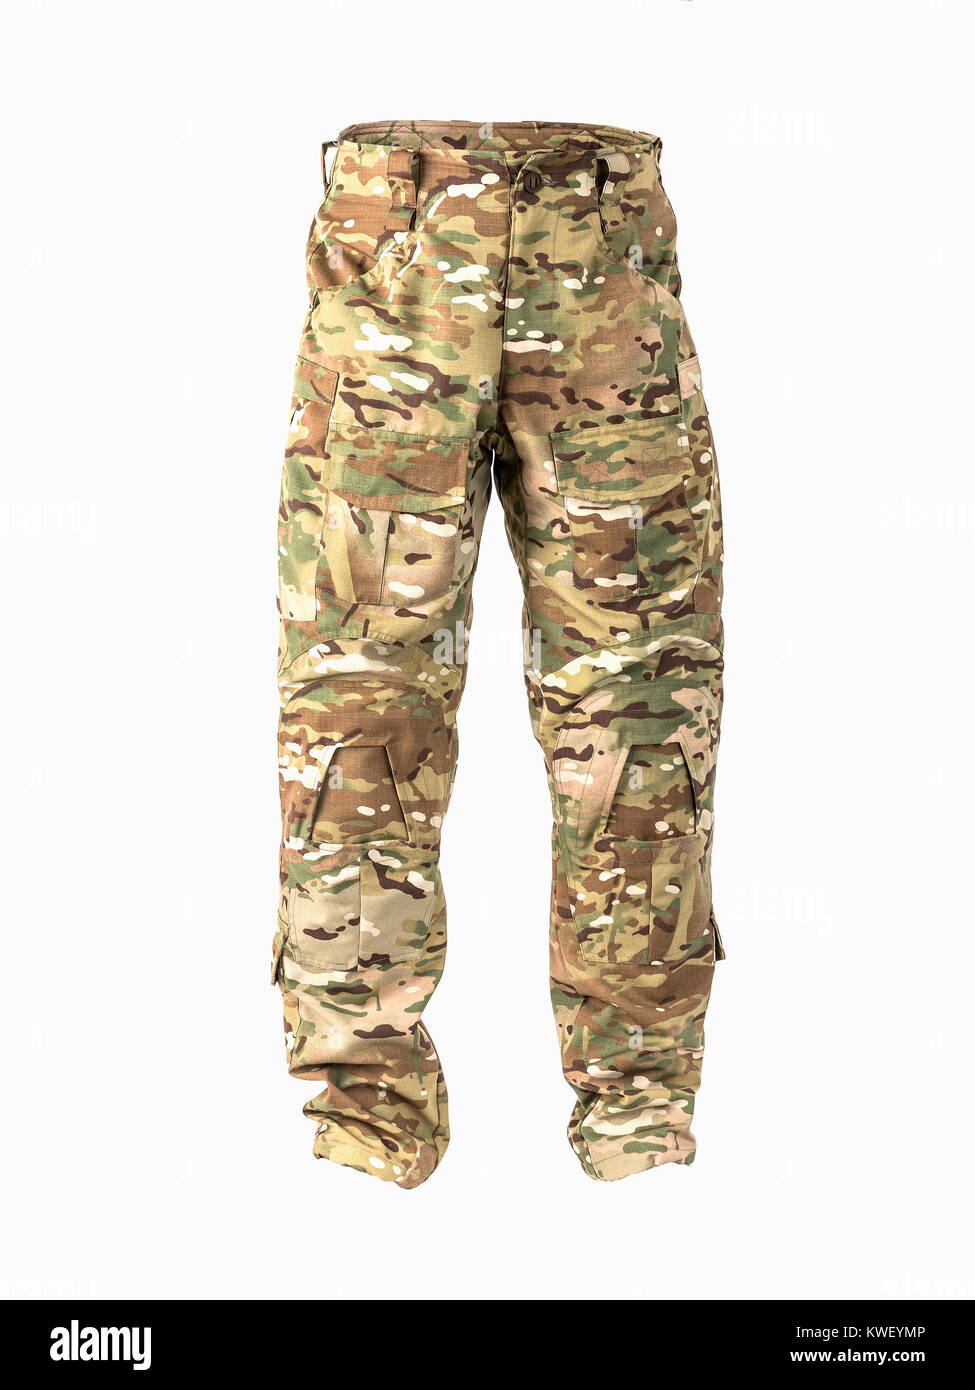 Chest pants for outdated activities. Camouflage pants Stock Photo